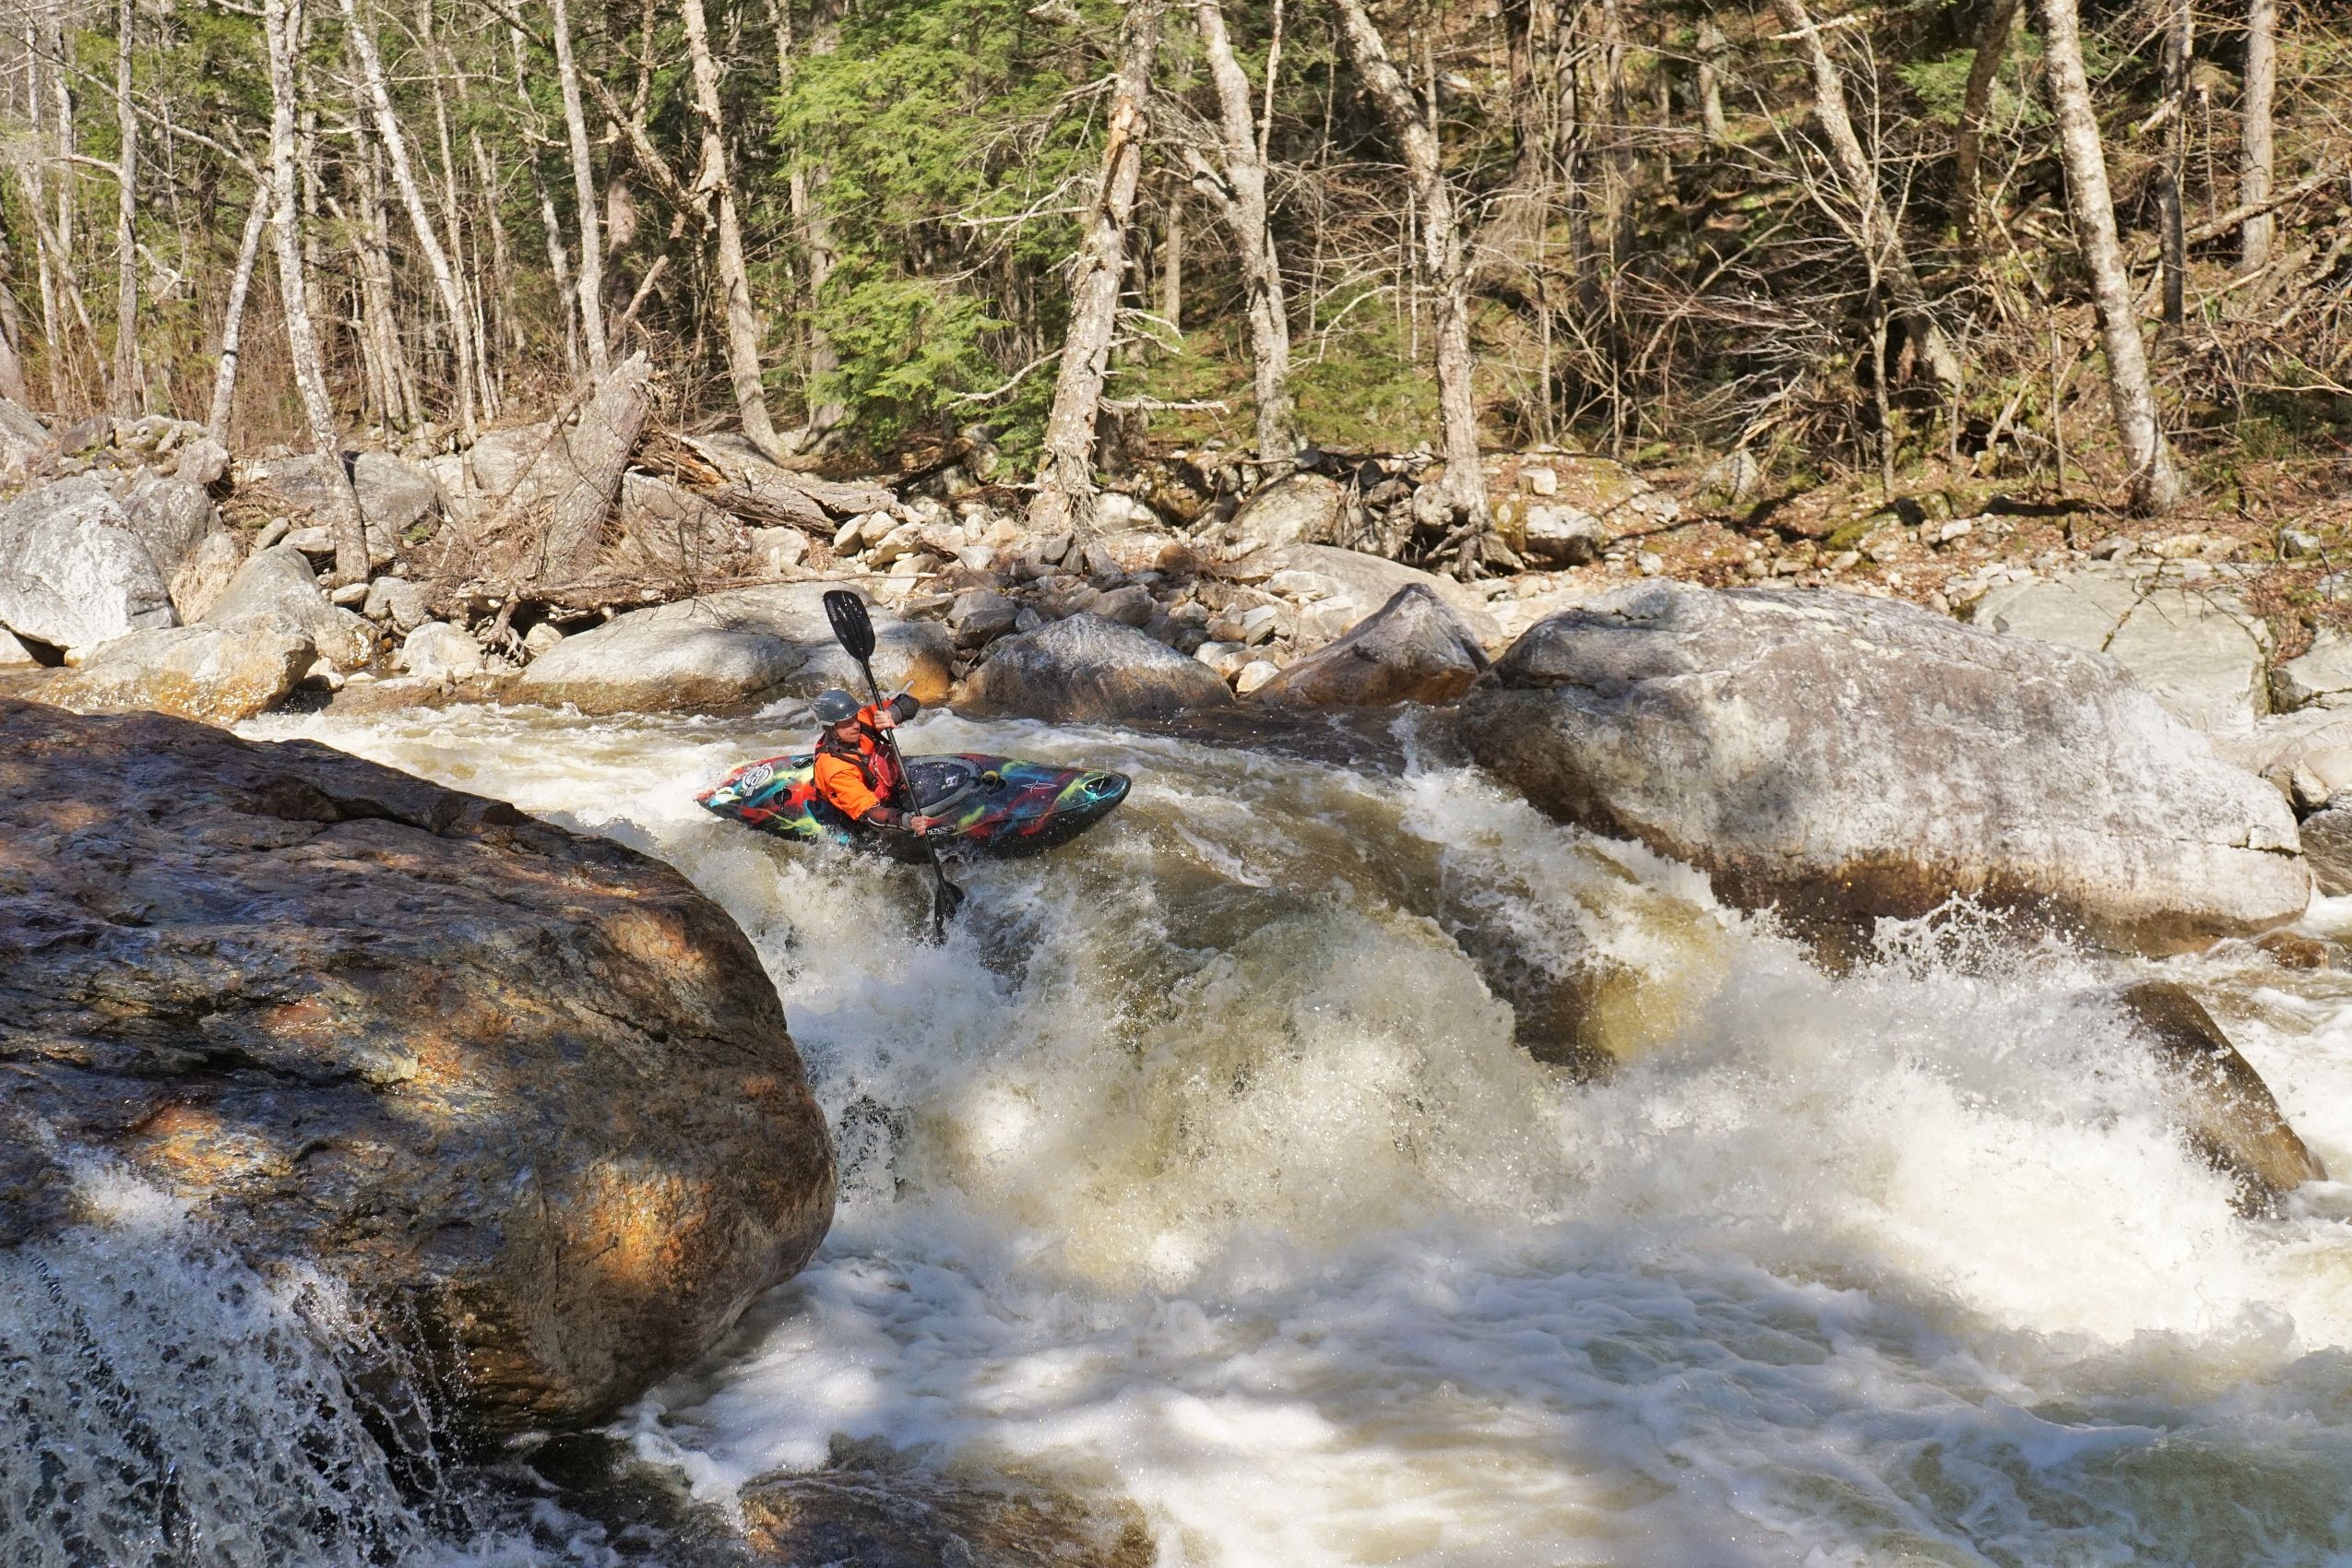 Mike Mainer runs the put in rapid on the Big Branch of Otter Creek Vermont whitewater kayaking